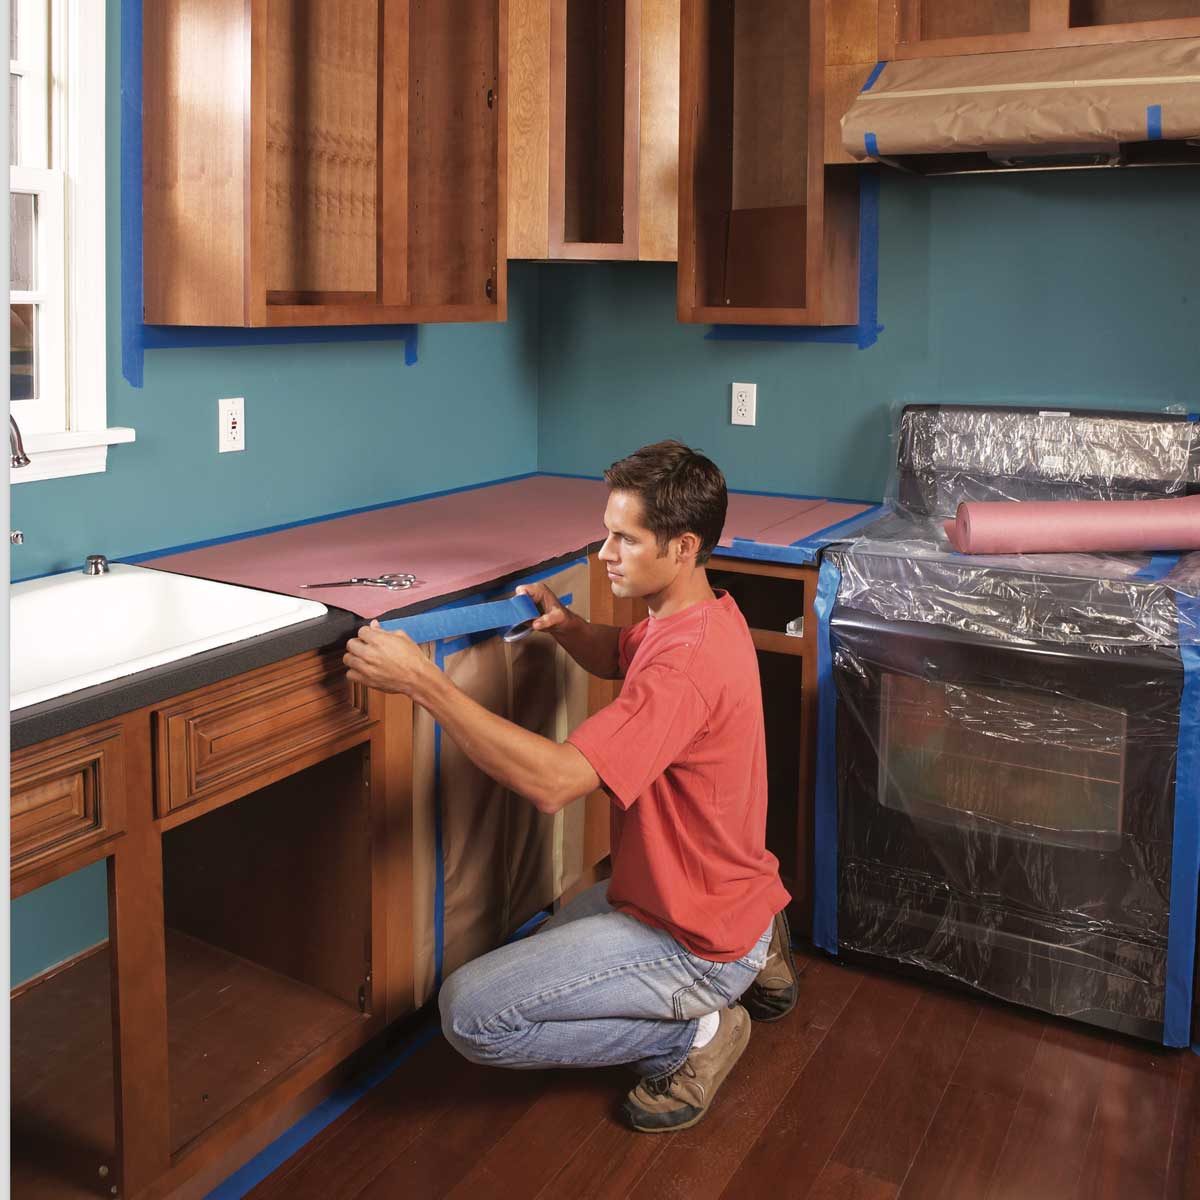 repaint-kitchen-furniture-procedures-and-suggestions-7